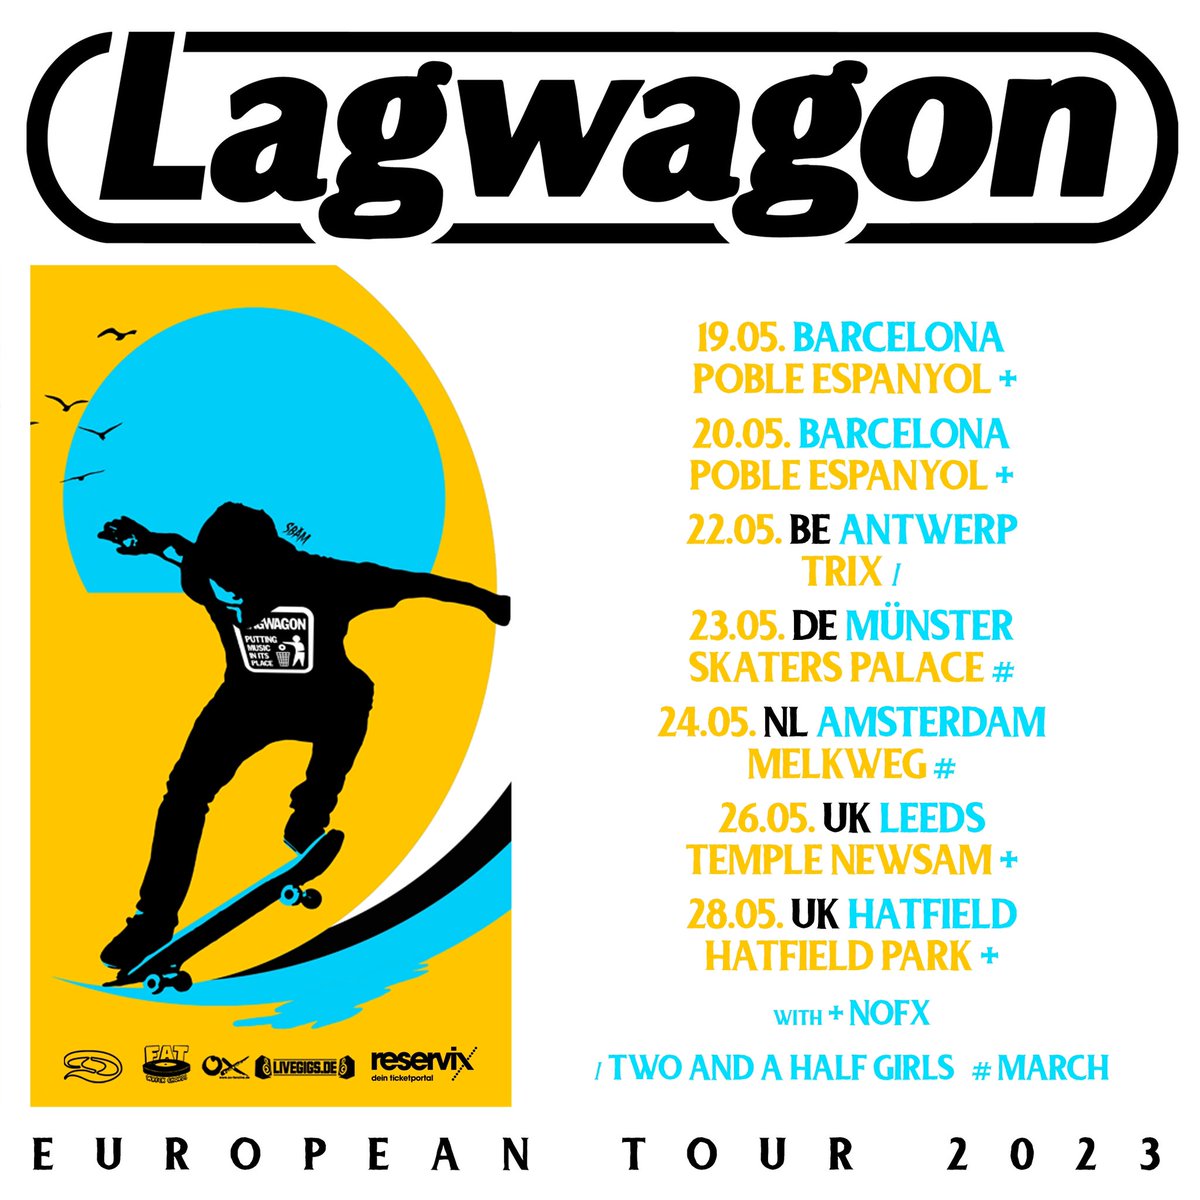 🚨EUROPE SHOWS KICK OF TOMORROW!🚨 2 nights in Barcelona with @NOFXband and friends, then headline gigs in Antwerp (Trix), Münster (@SkatersPalace) and Amsterdam (@melkweg), and ending in the UK. Catch us if you can! Lagwagon.com/tour 🤘🏽🎸✈️🍻👍🏽